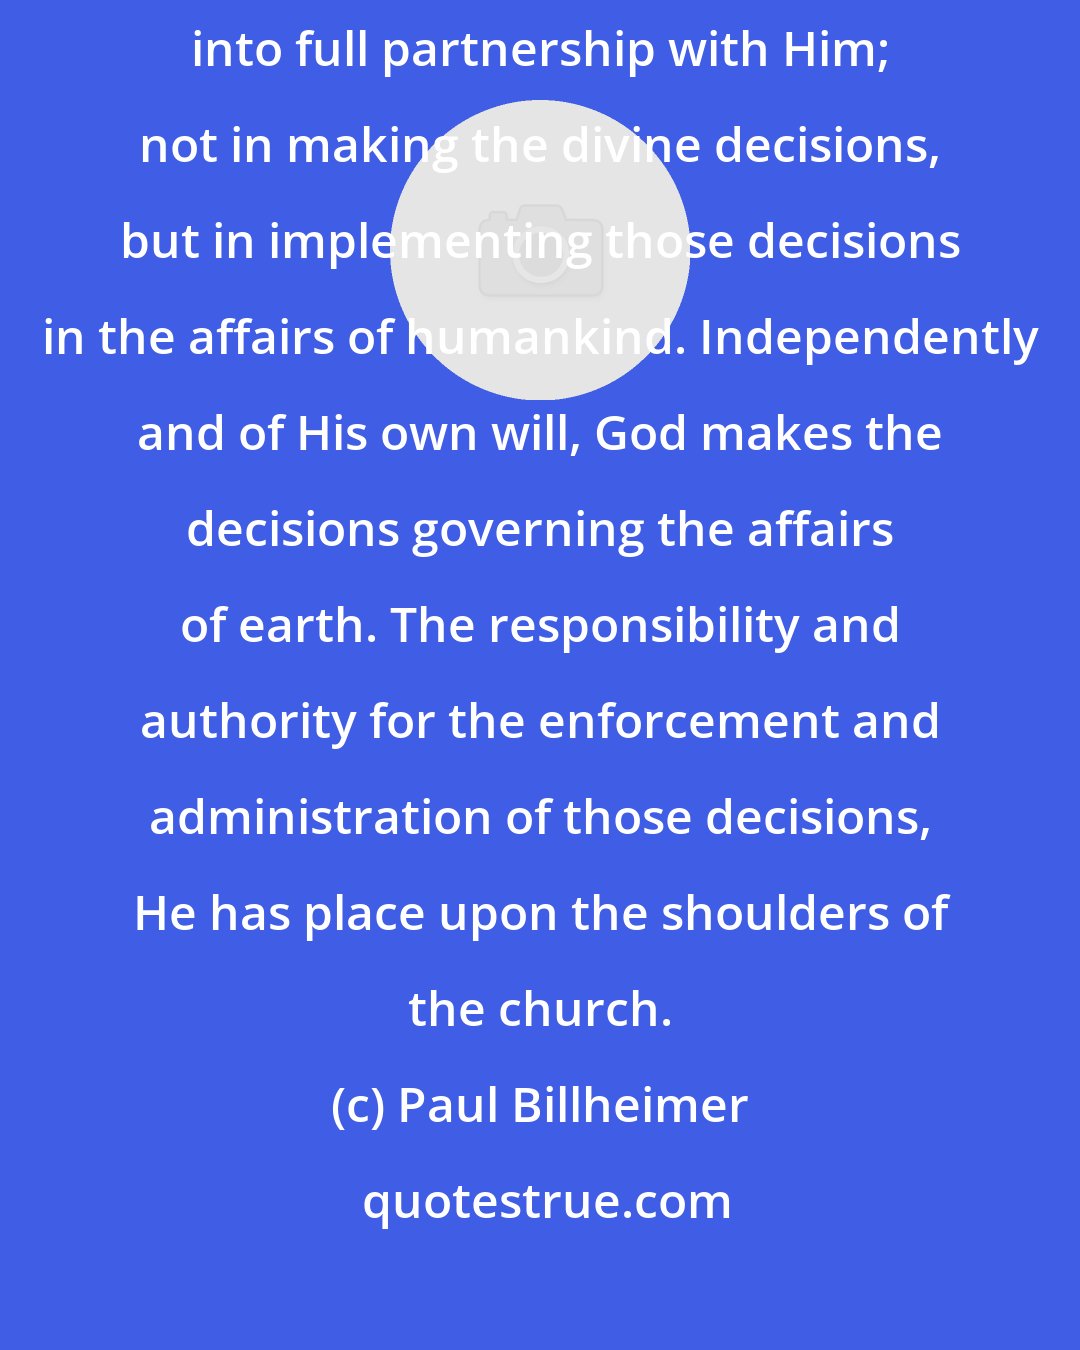 Paul Billheimer: Through the plan of prayer, God actually is inviting redeemed man into full partnership with Him; not in making the divine decisions, but in implementing those decisions in the affairs of humankind. Independently and of His own will, God makes the decisions governing the affairs of earth. The responsibility and authority for the enforcement and administration of those decisions, He has place upon the shoulders of the church.